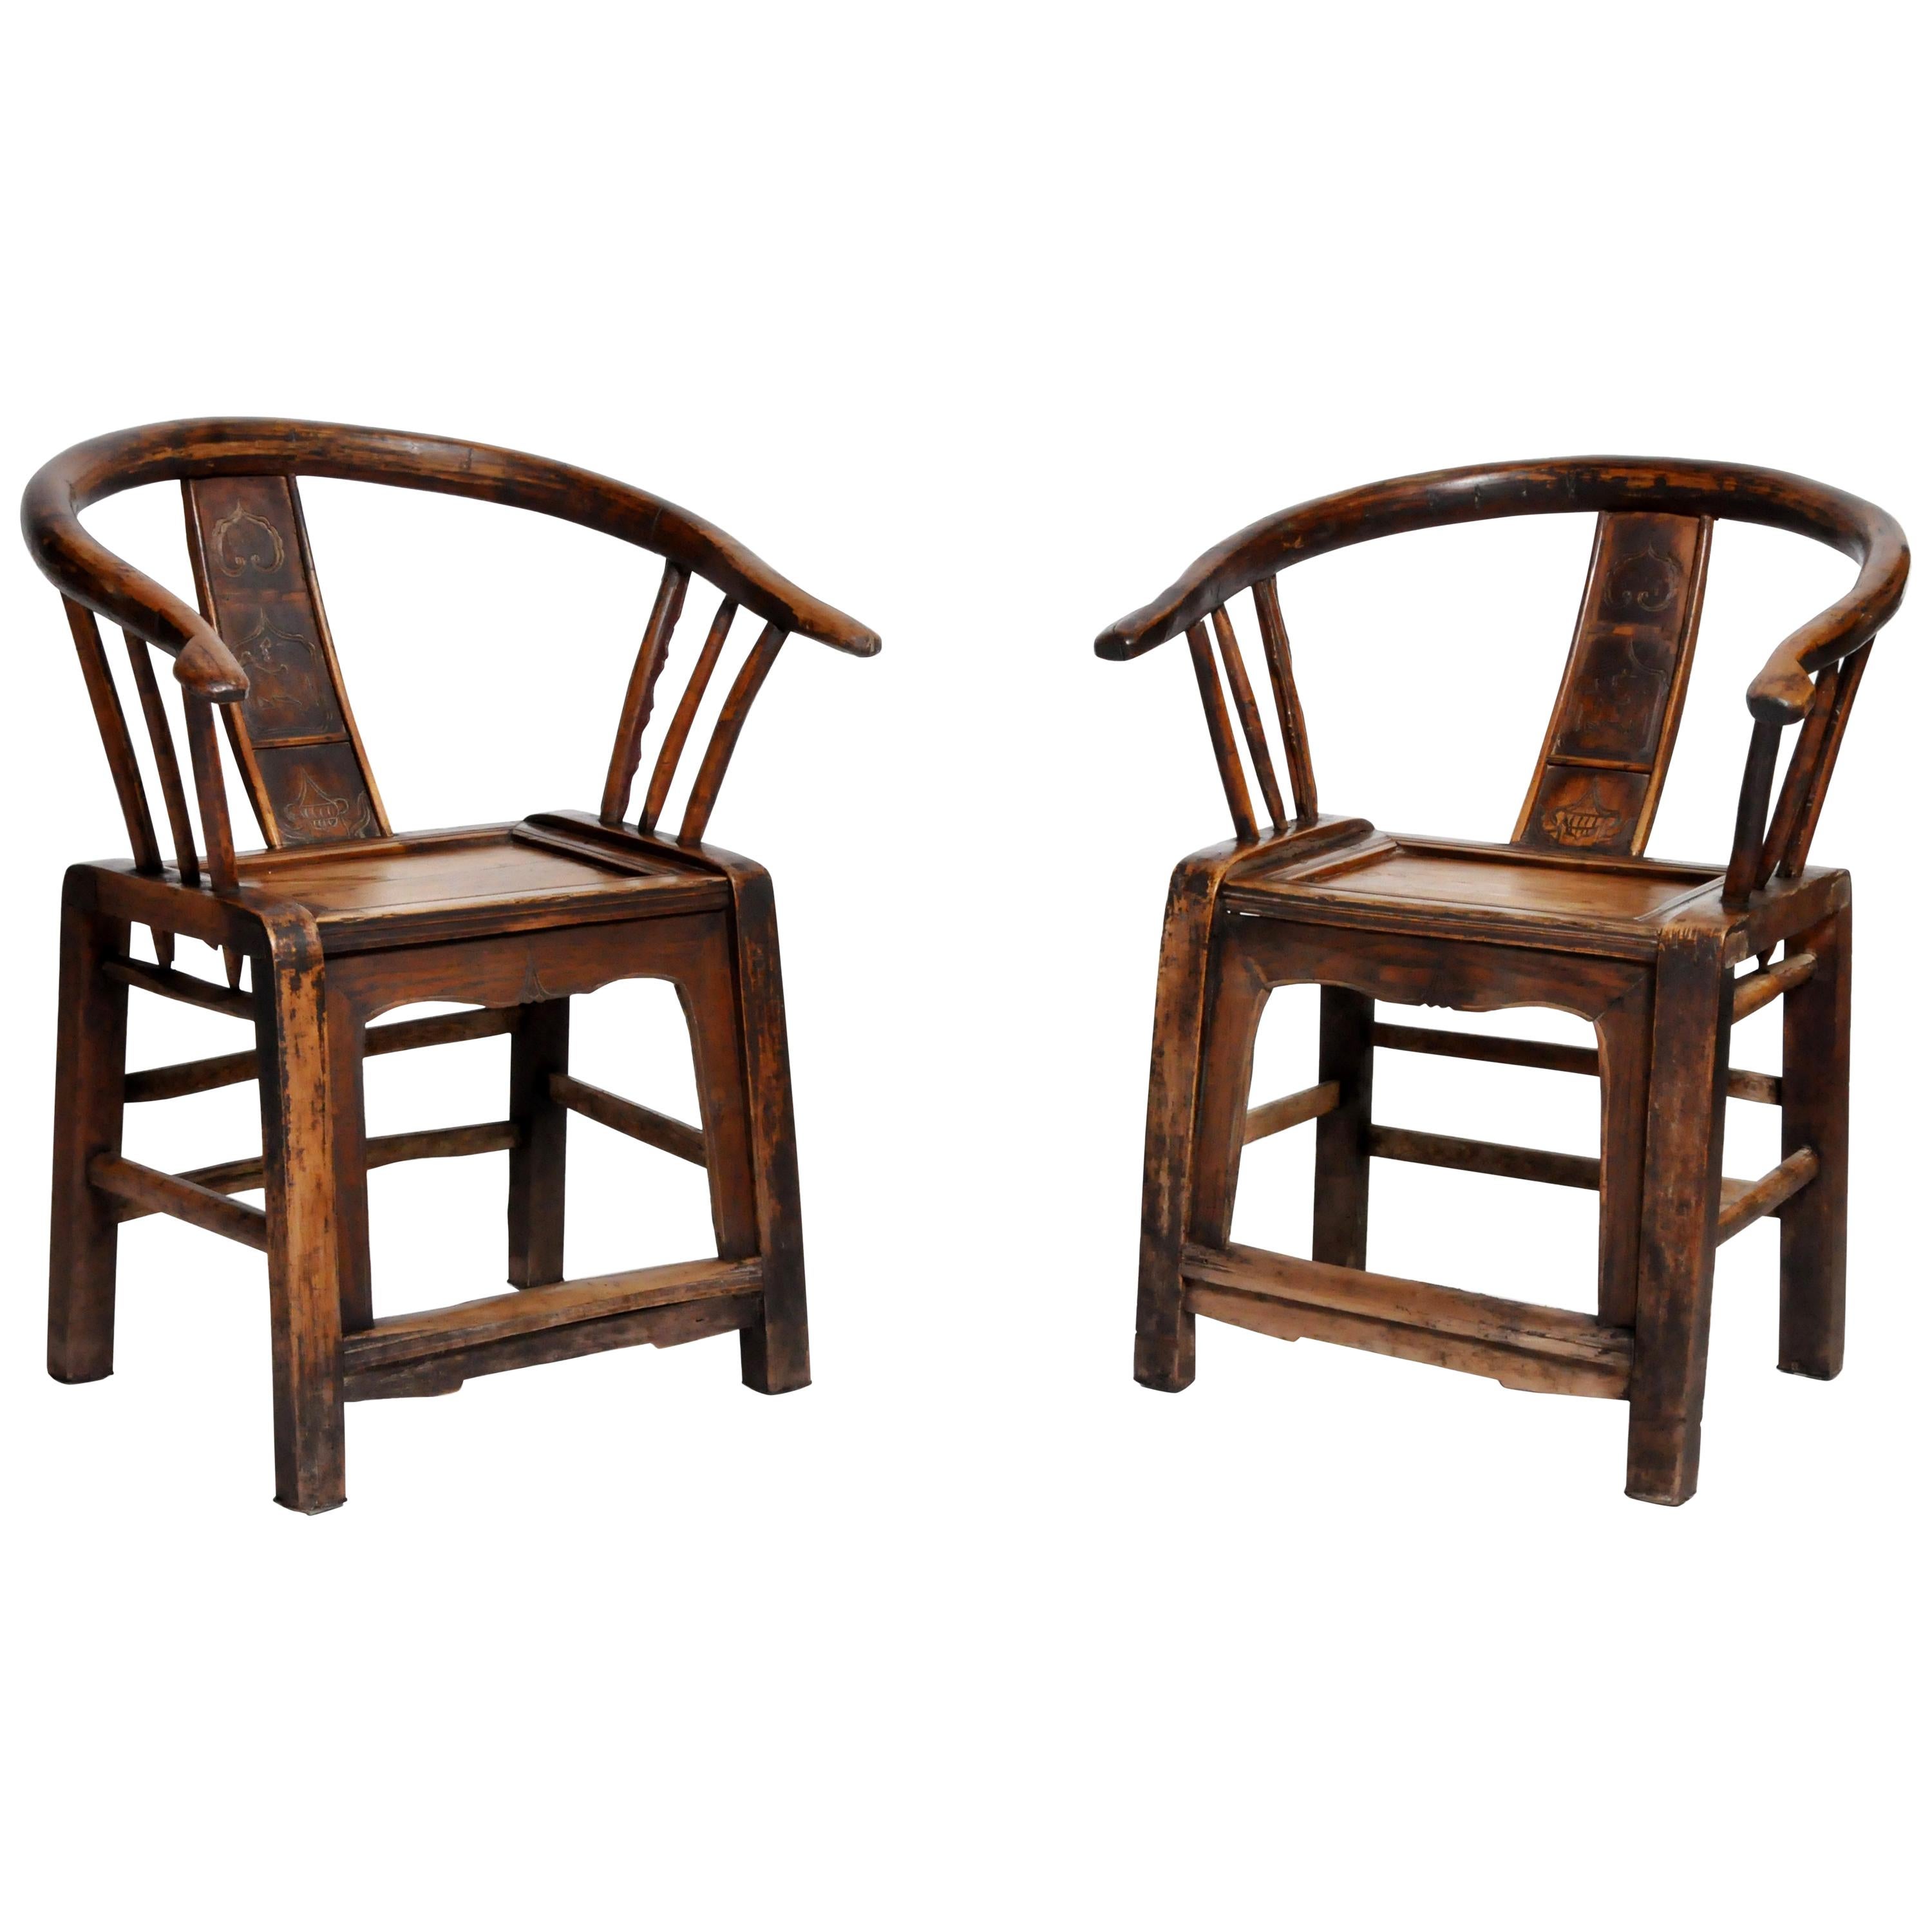 Pair of Qing Dynasty Horseshoe Shape Round Chairs